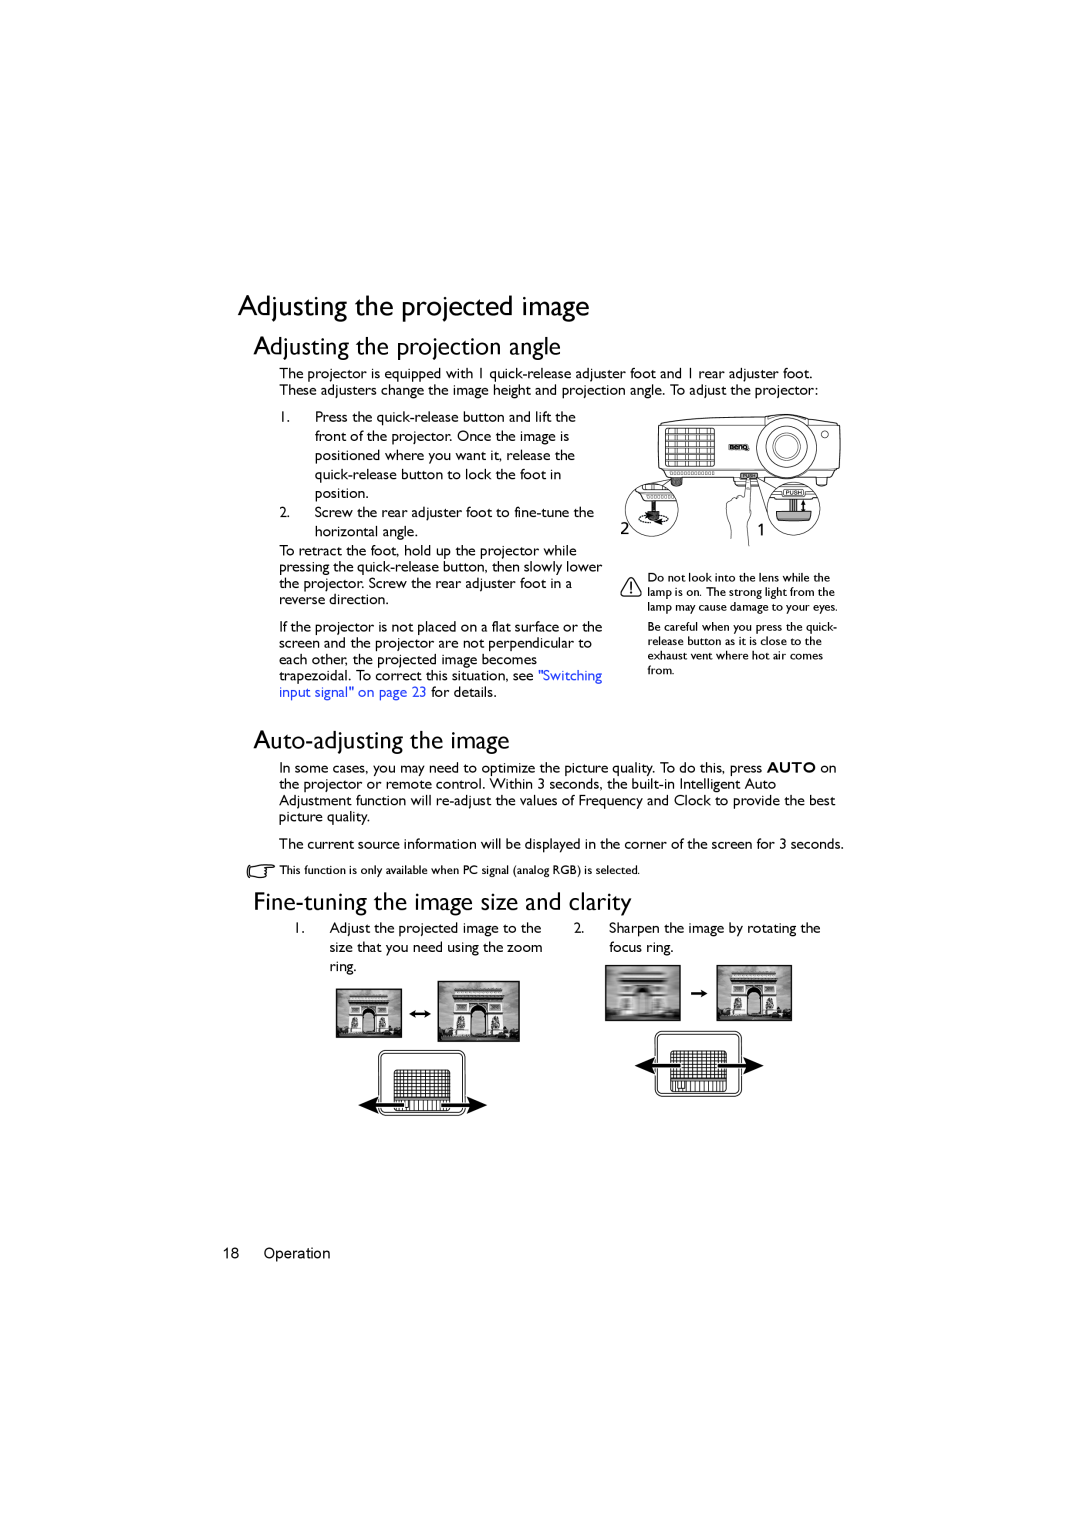 BenQ MS502, MX503 user manual Adjusting the projected image, Adjusting the projection angle, Auto-adjusting the image 